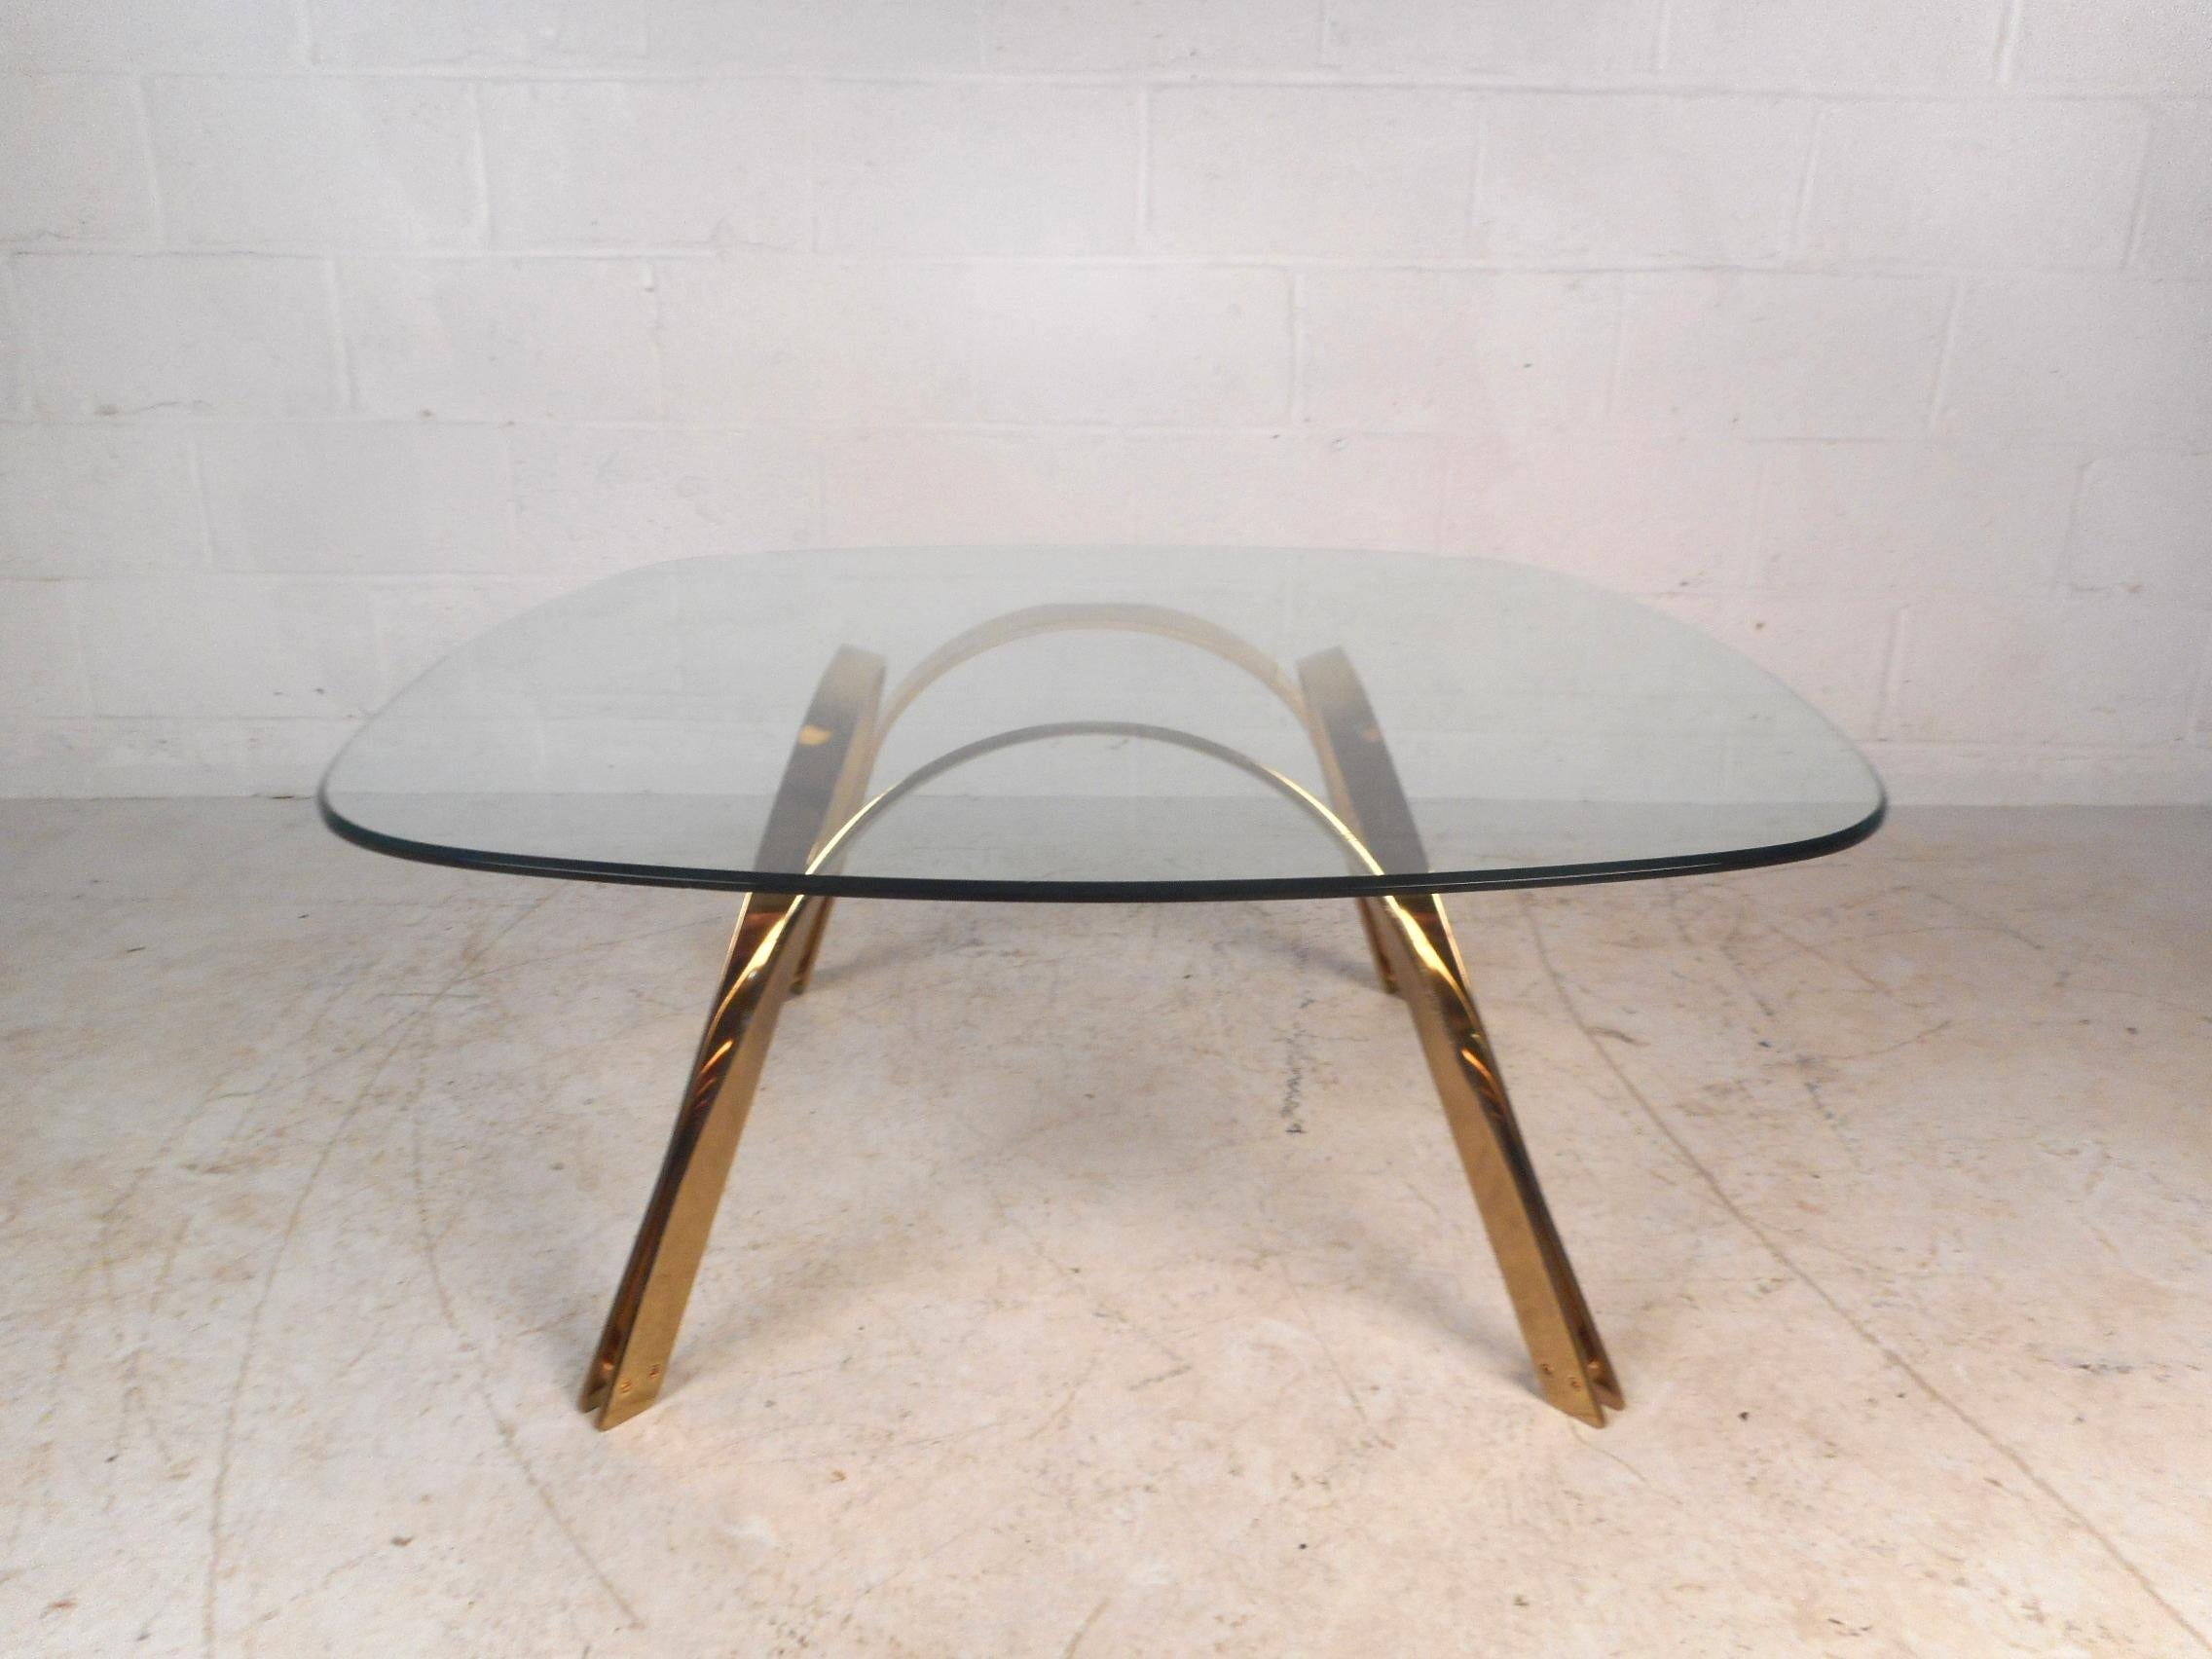 This stunning coffee table from the 1960s features a sculpted brass base with curved legs. A thick glass top with rounded edges and a solid flat bar base shows true quality. This stylish midcentury piece makes the perfect addition to any modern